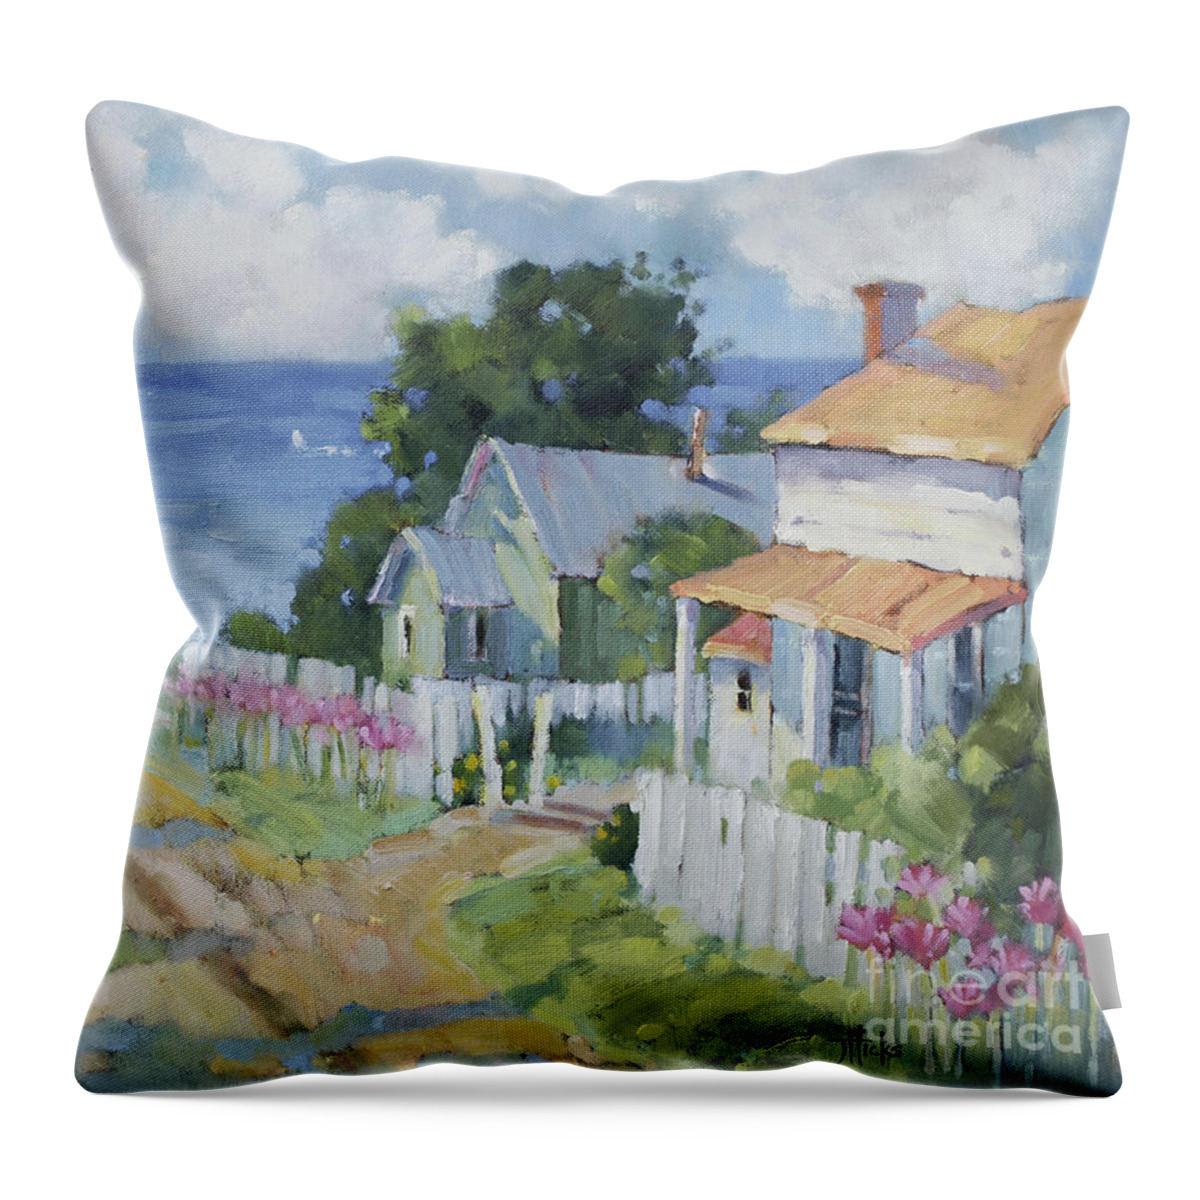 Impressionist Throw Pillow featuring the painting Pink Lady Lilies by the Sea by Joyce Hicks by Joyce Hicks